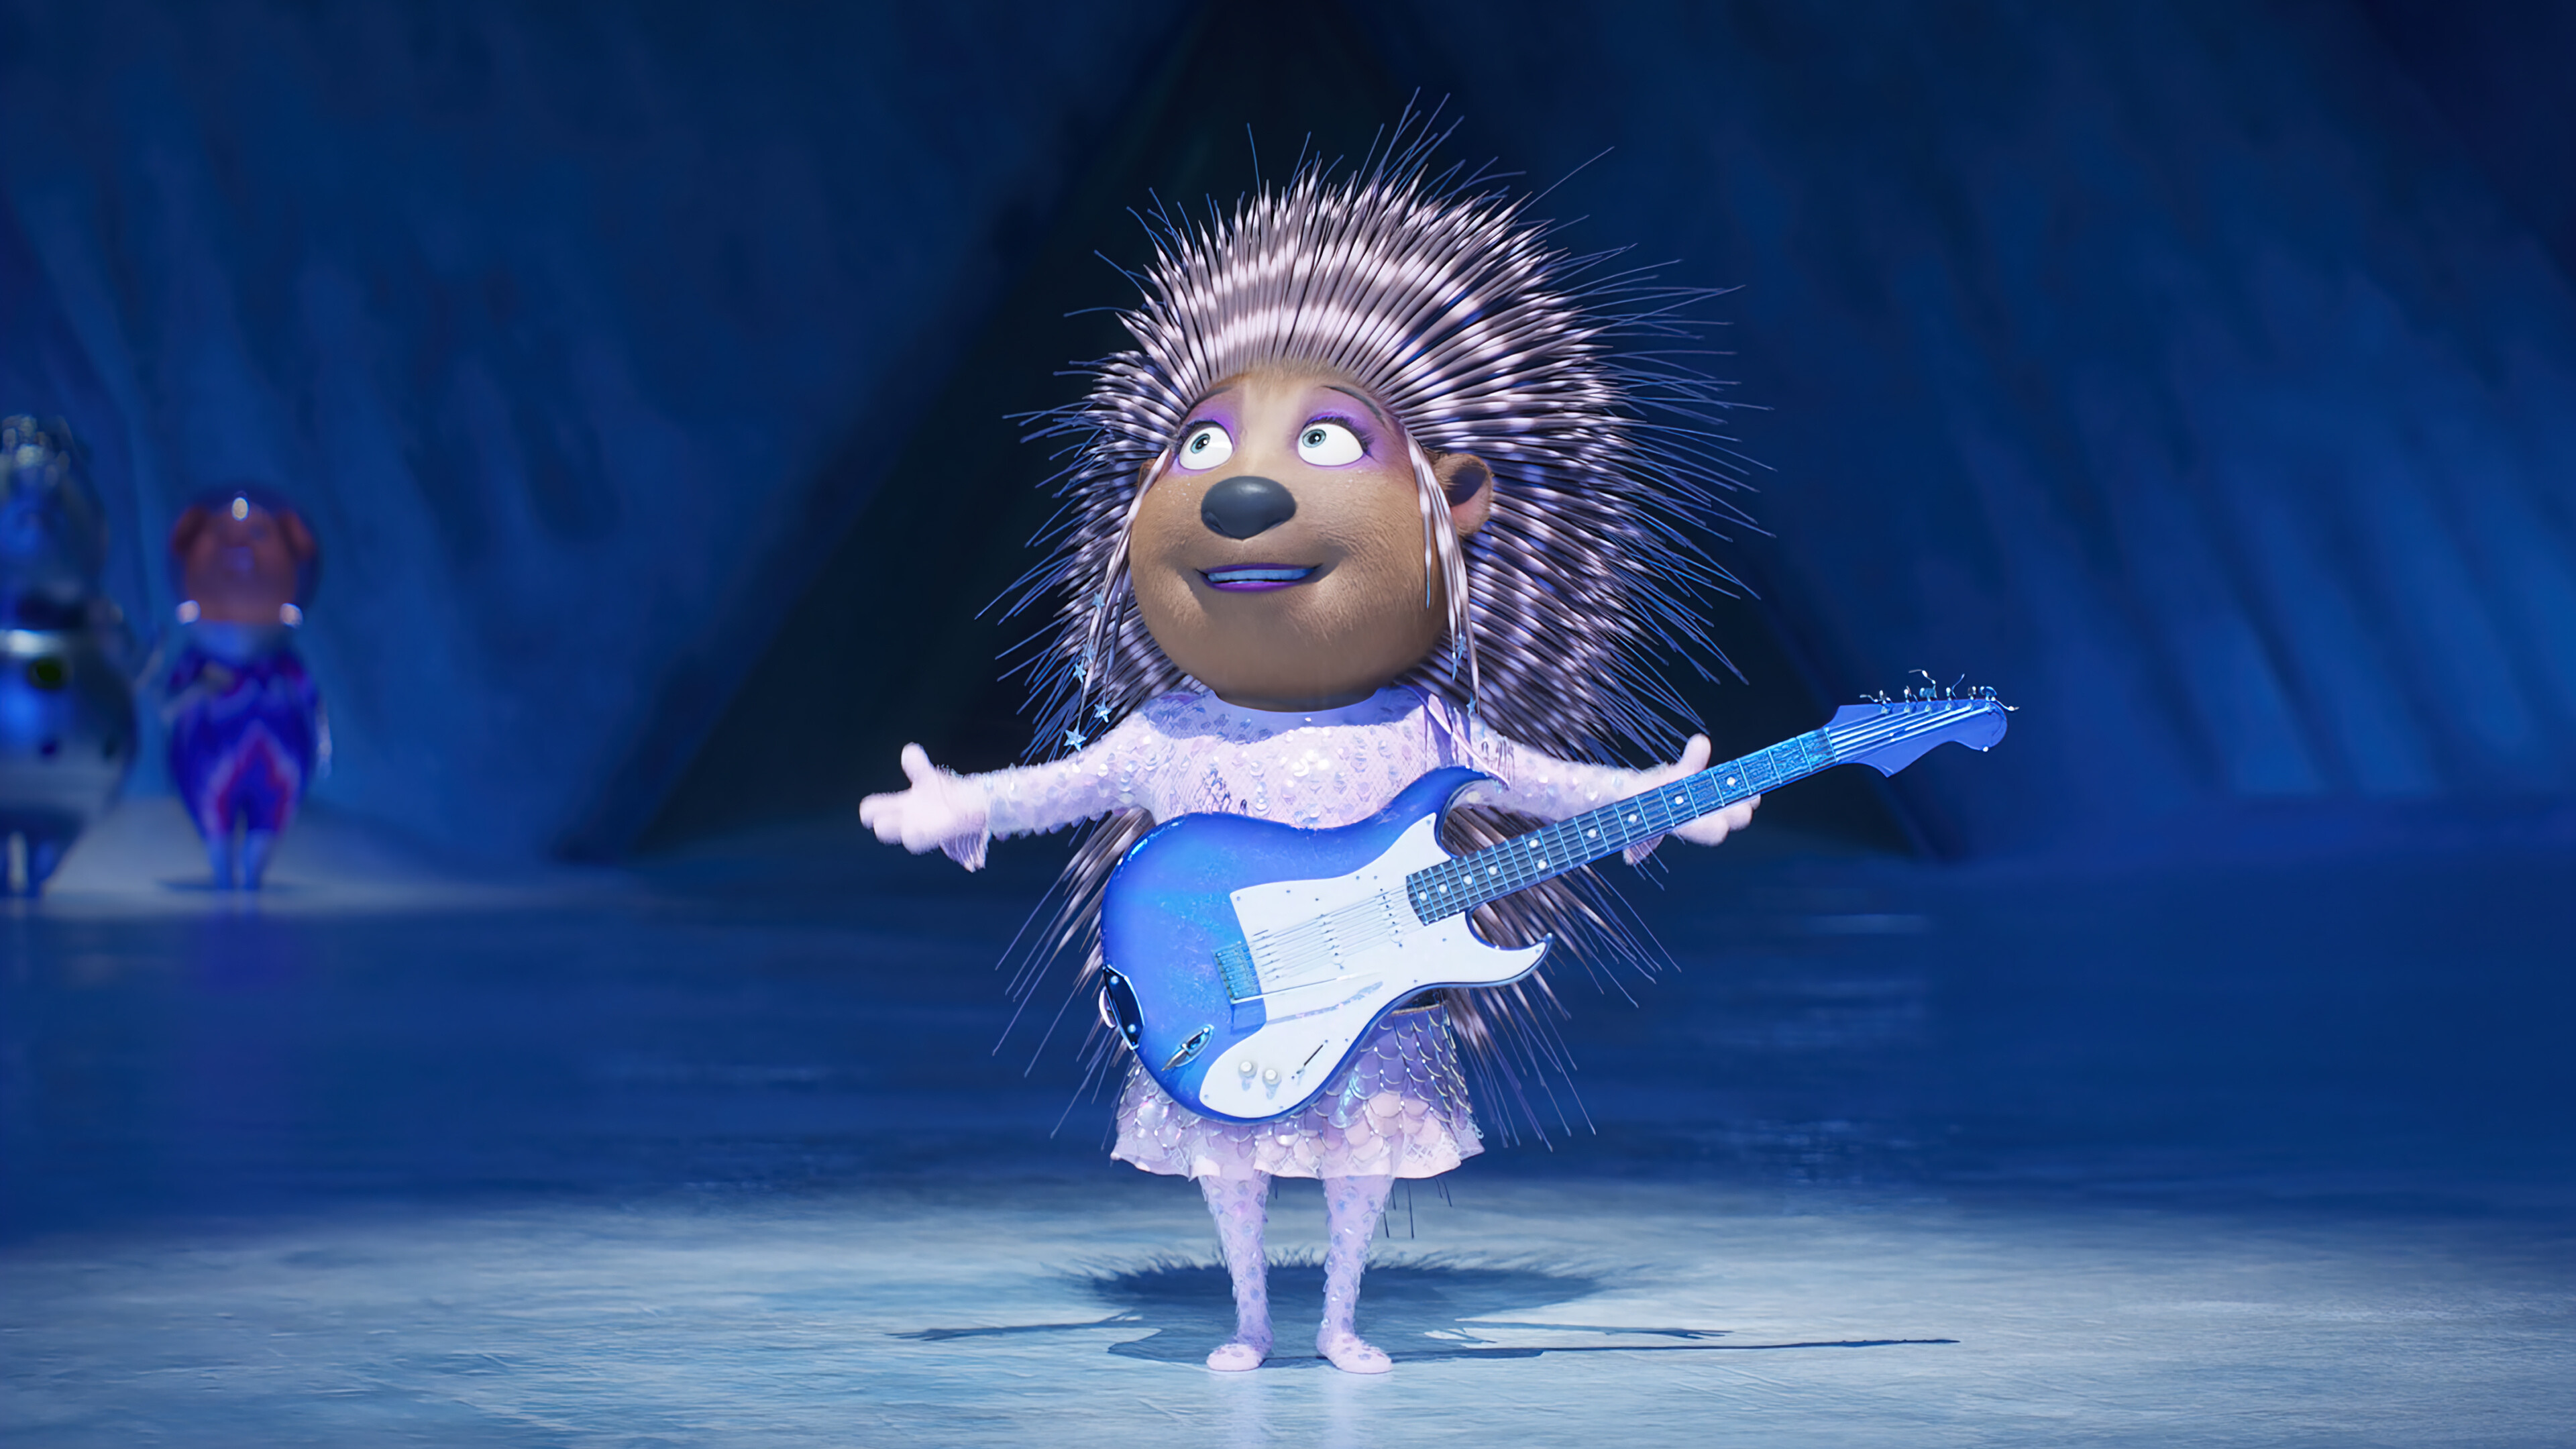 Sing 2: Ash, A female crested porcupine, One of the main characters in the movie. 3840x2160 4K Wallpaper.